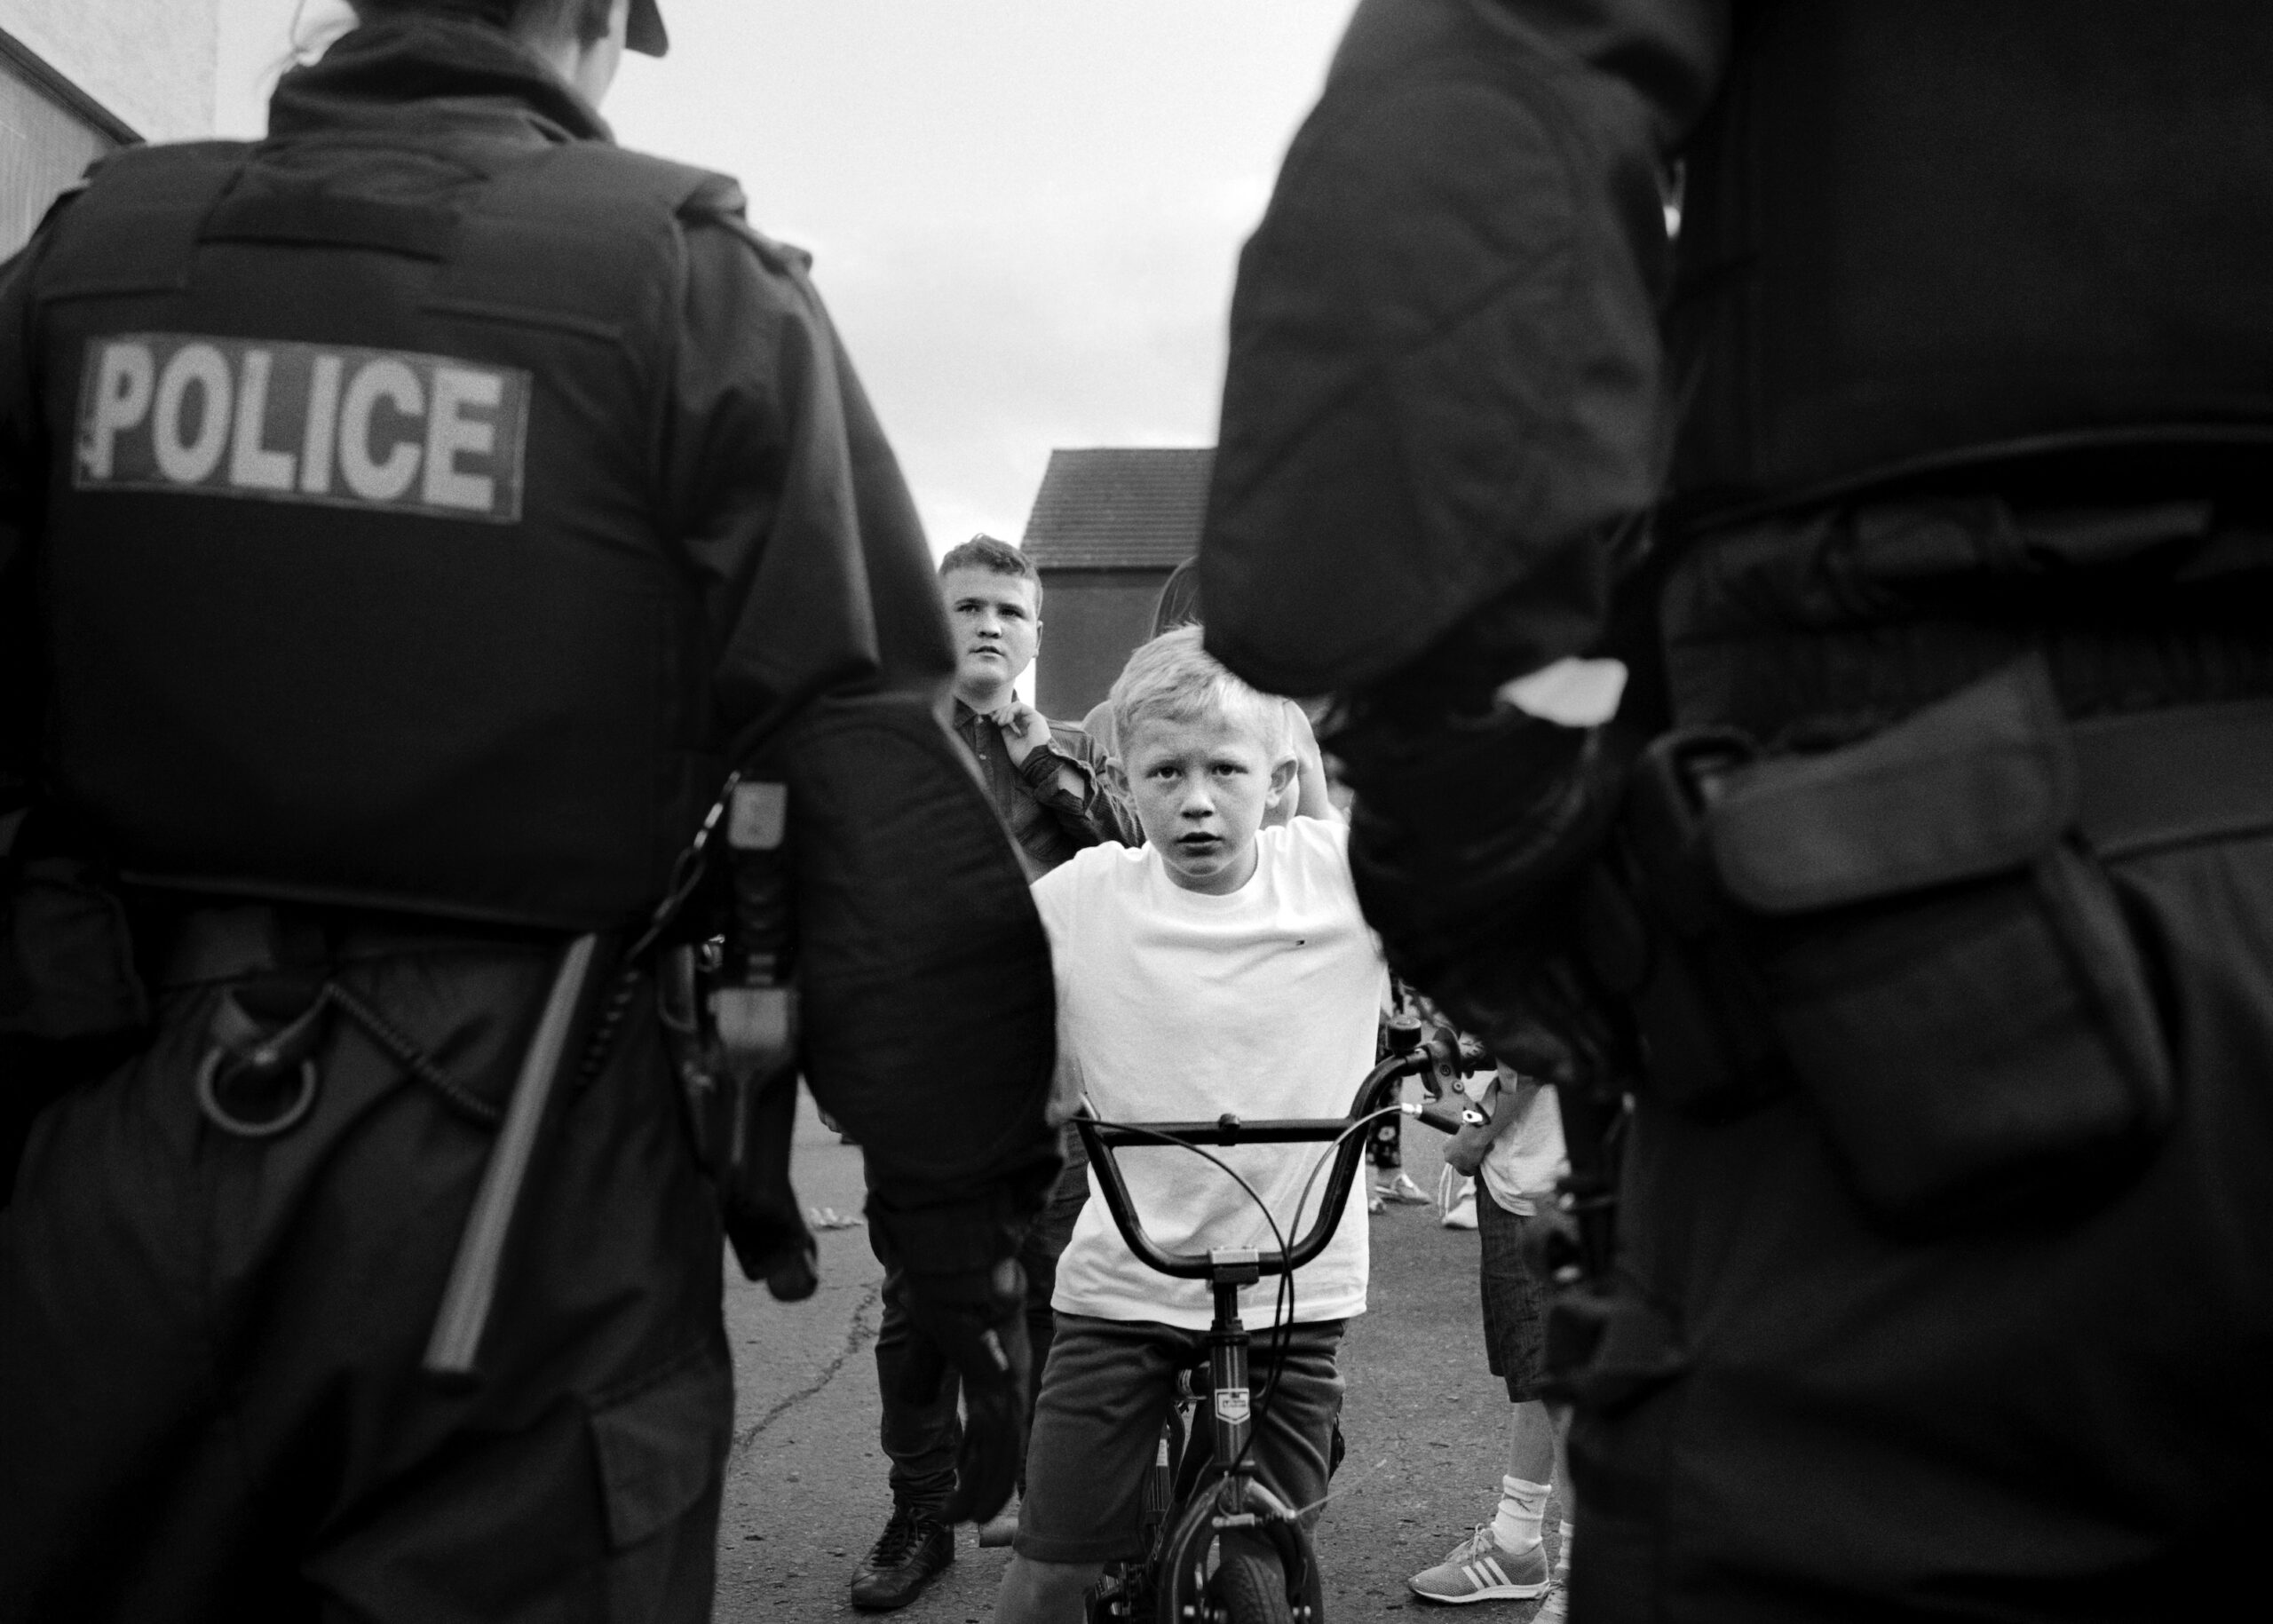 Brendan behind a police line on Trinity Street, from the series 'Wee Muckers'